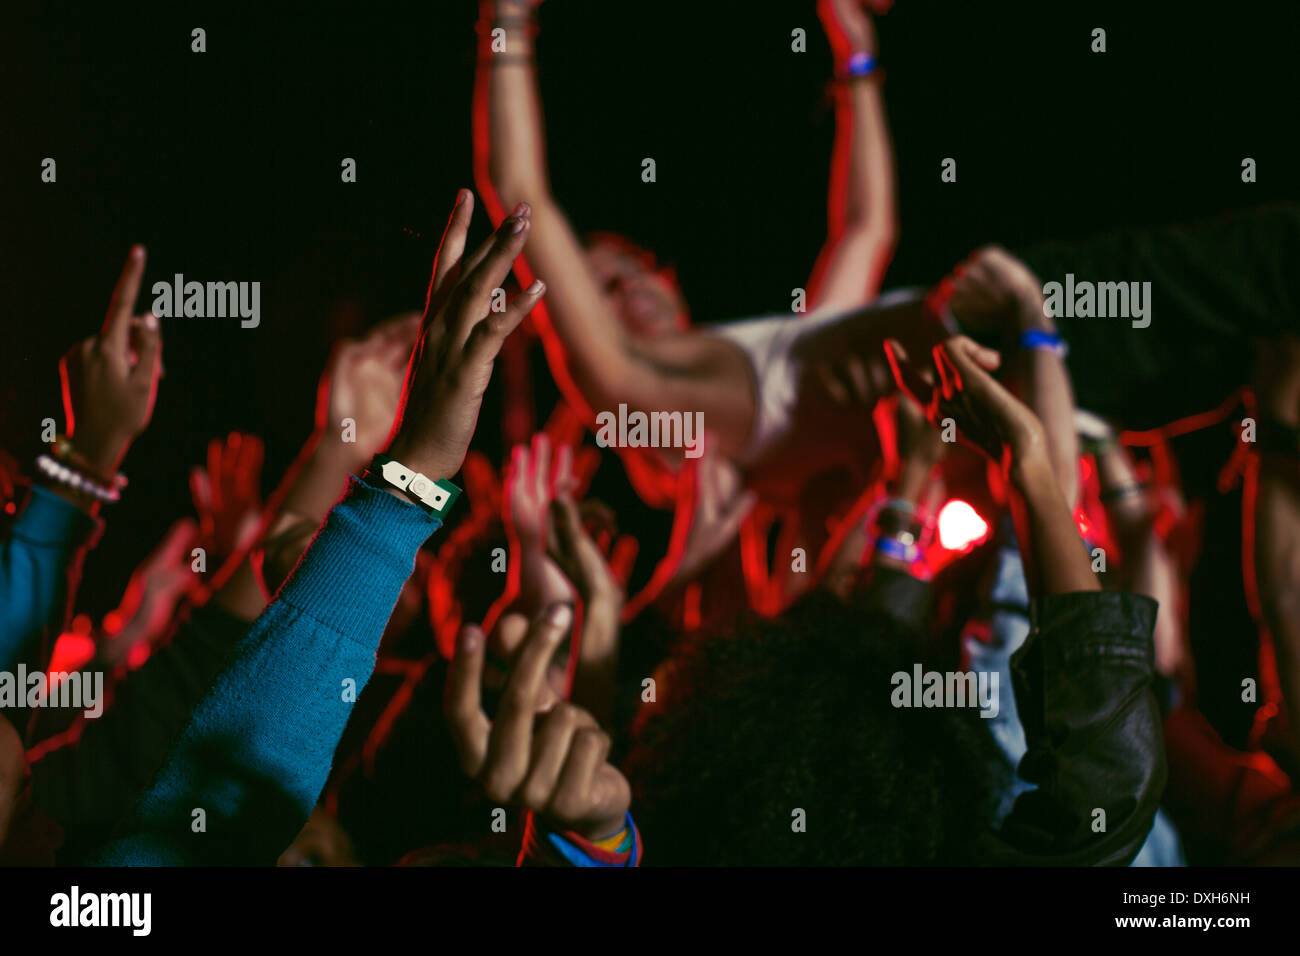 Man crowd surfing at music festival Stock Photo